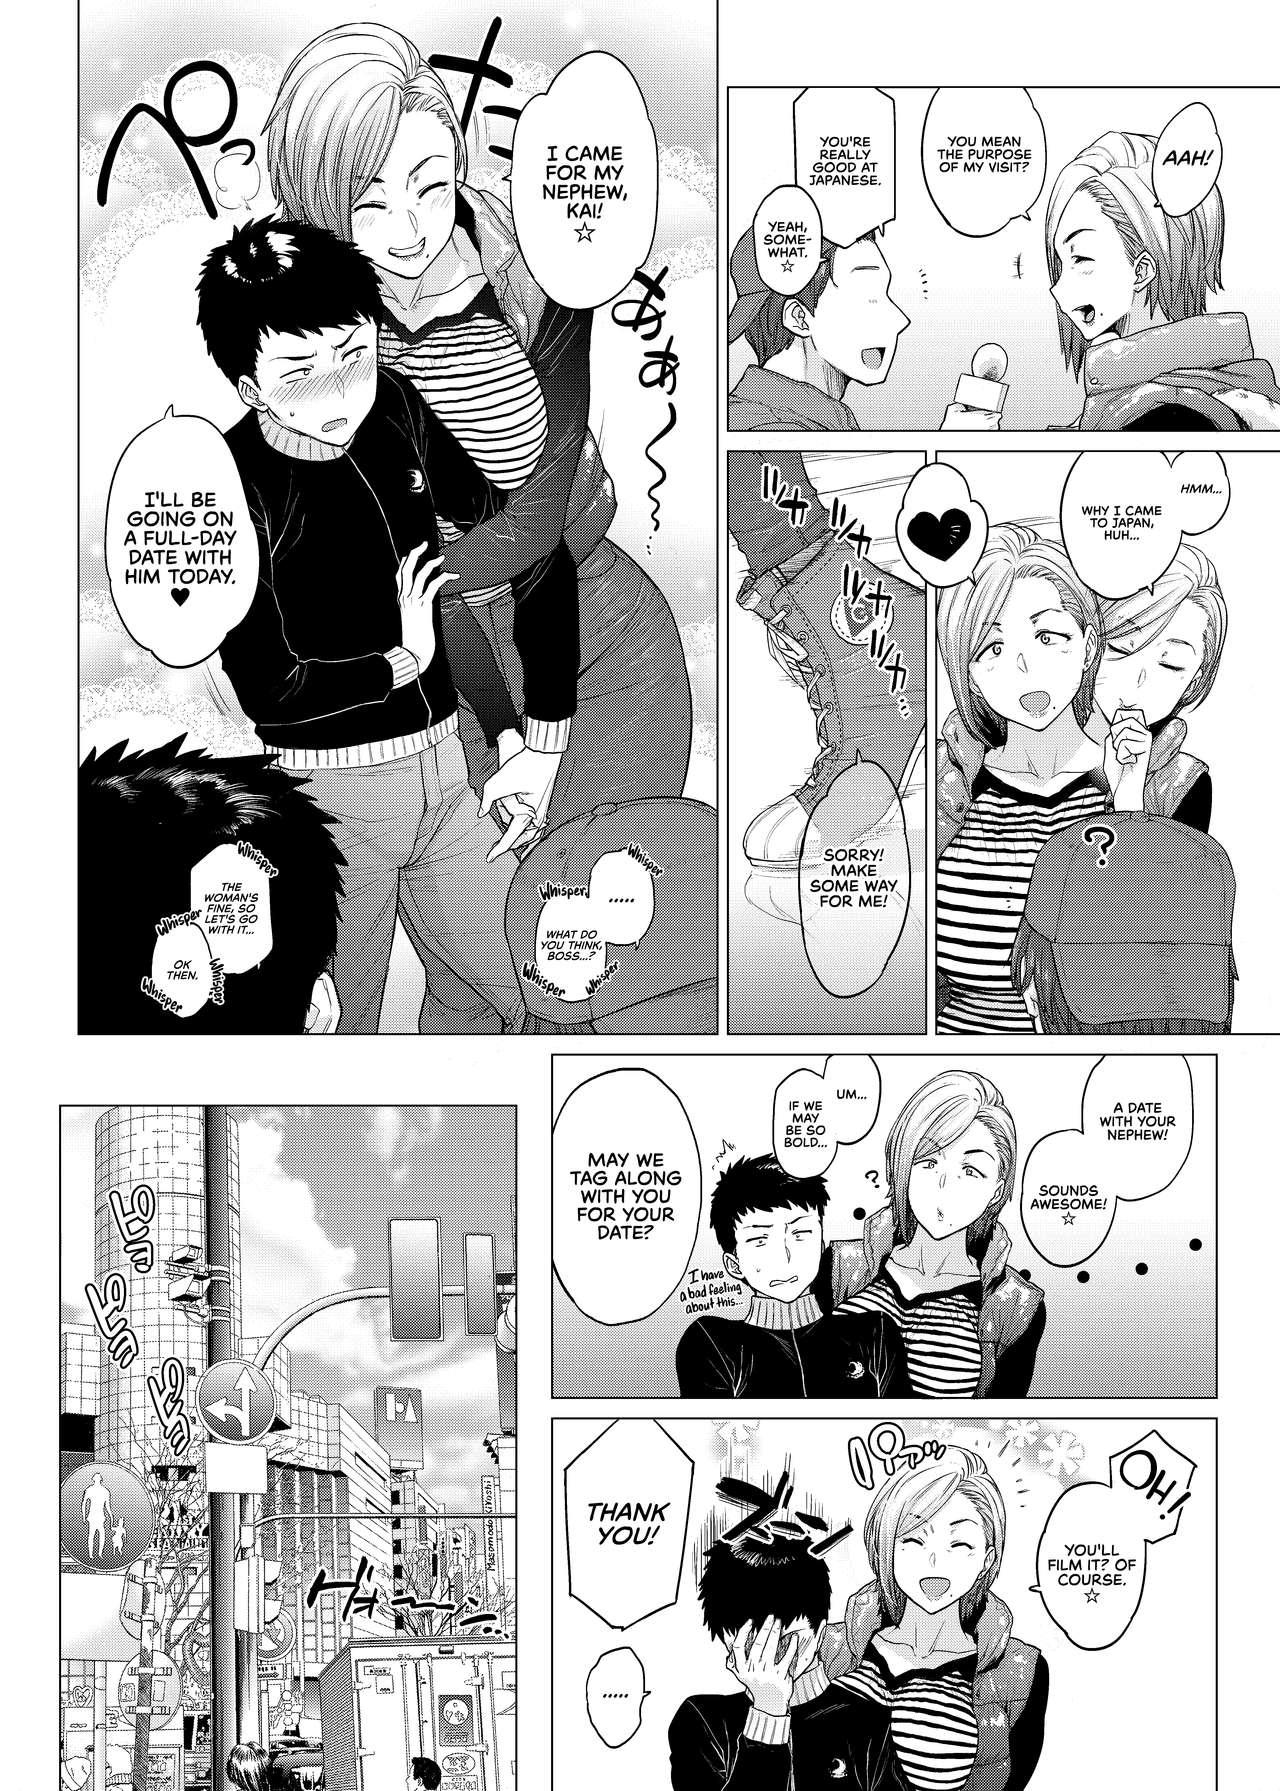 Analfuck Why did you オーバー the sea? | Why did you cross over the sea? - Original Hardfuck - Page 5